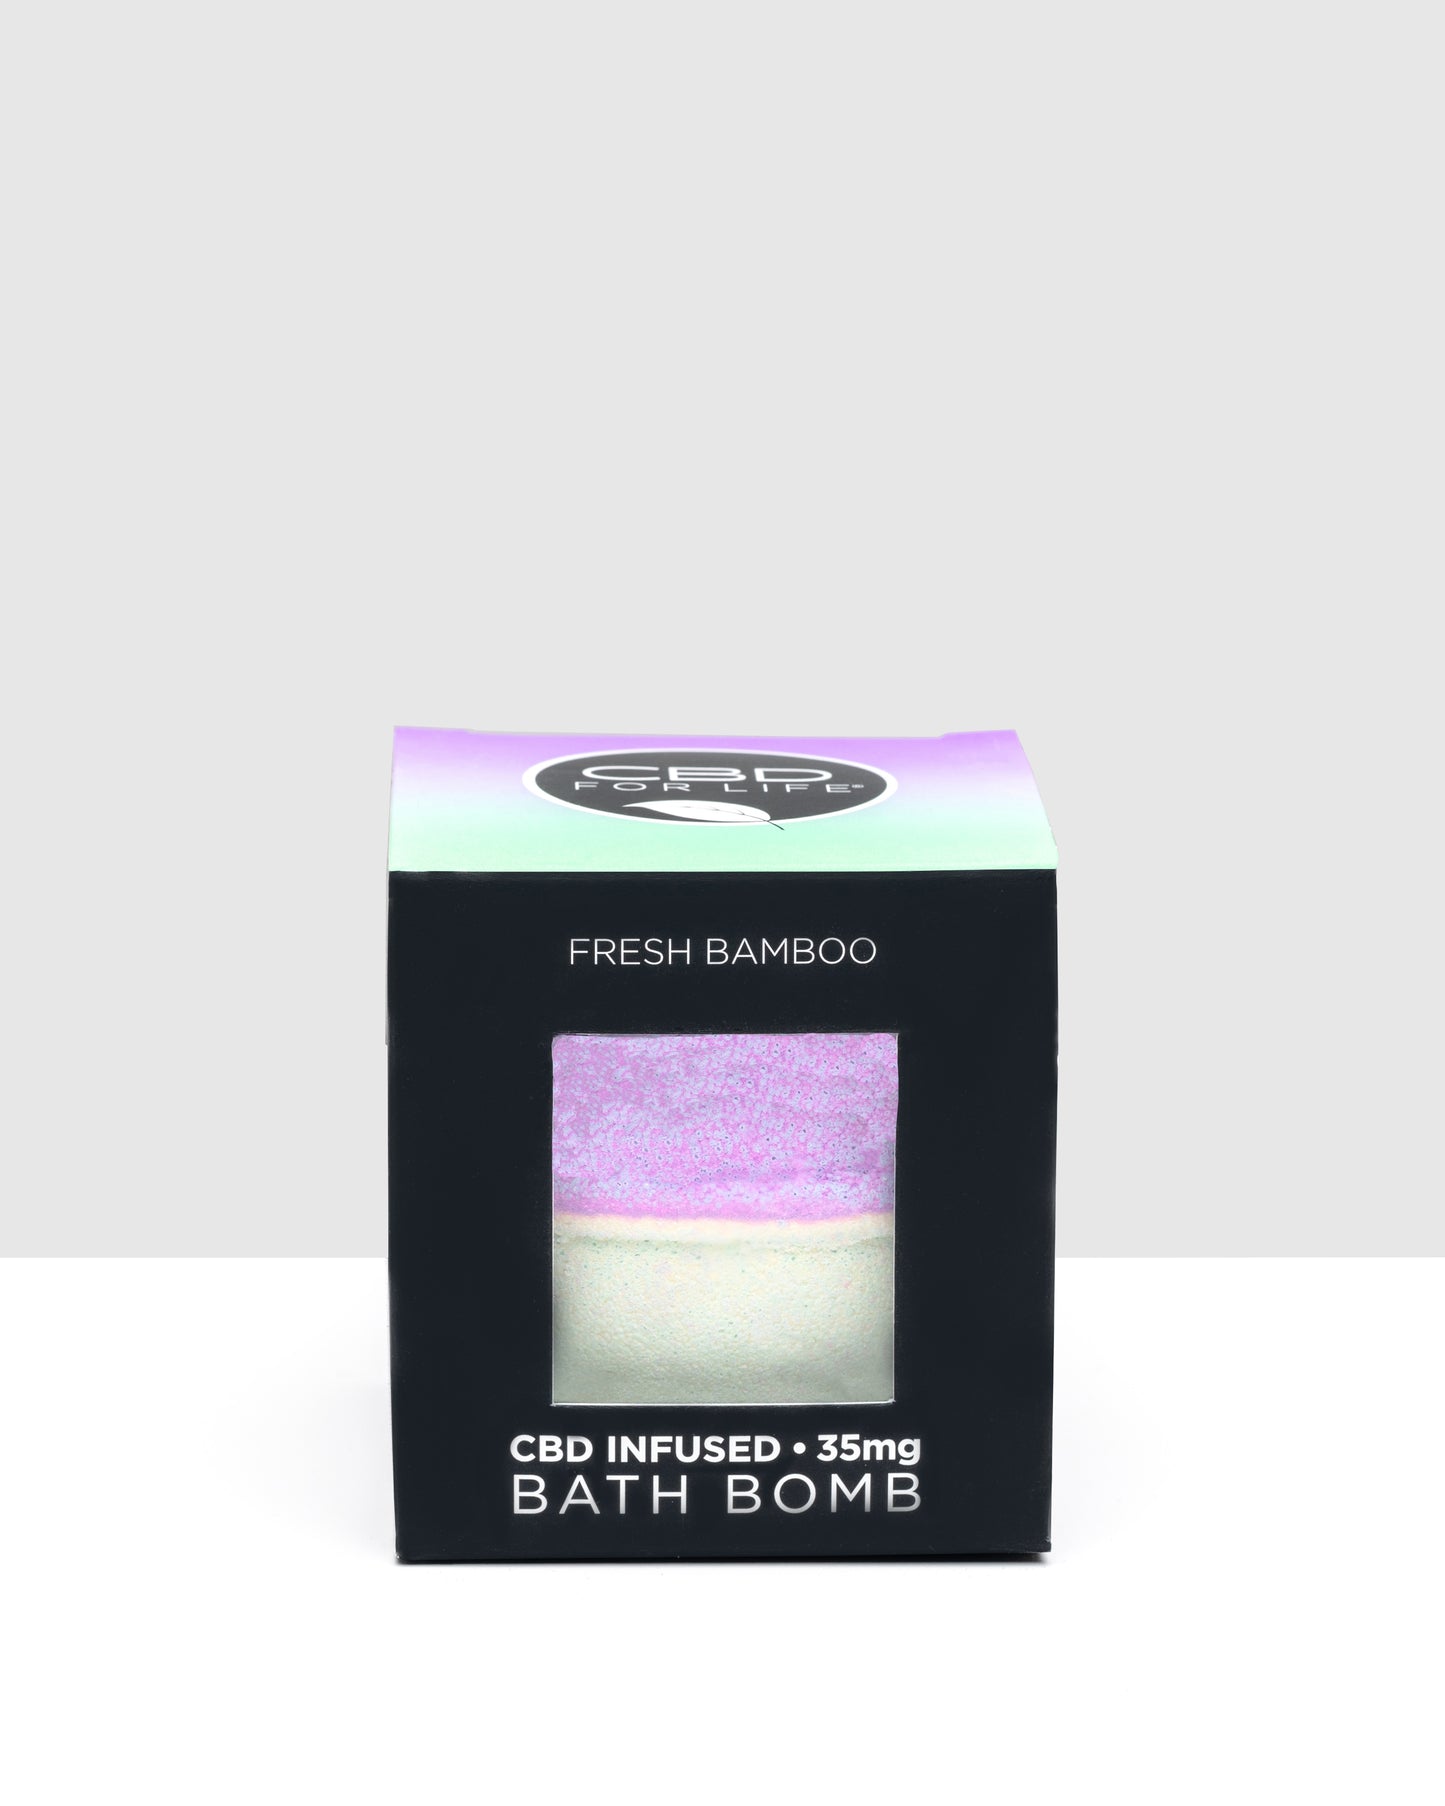 Time to create a relaxing spa experience with our Fresh Bamboo CBD Bath Bomb. CBD meets coconut oil and ylang ylang to help you soothe you into a relaxing bath and melt away stress and anxiety.